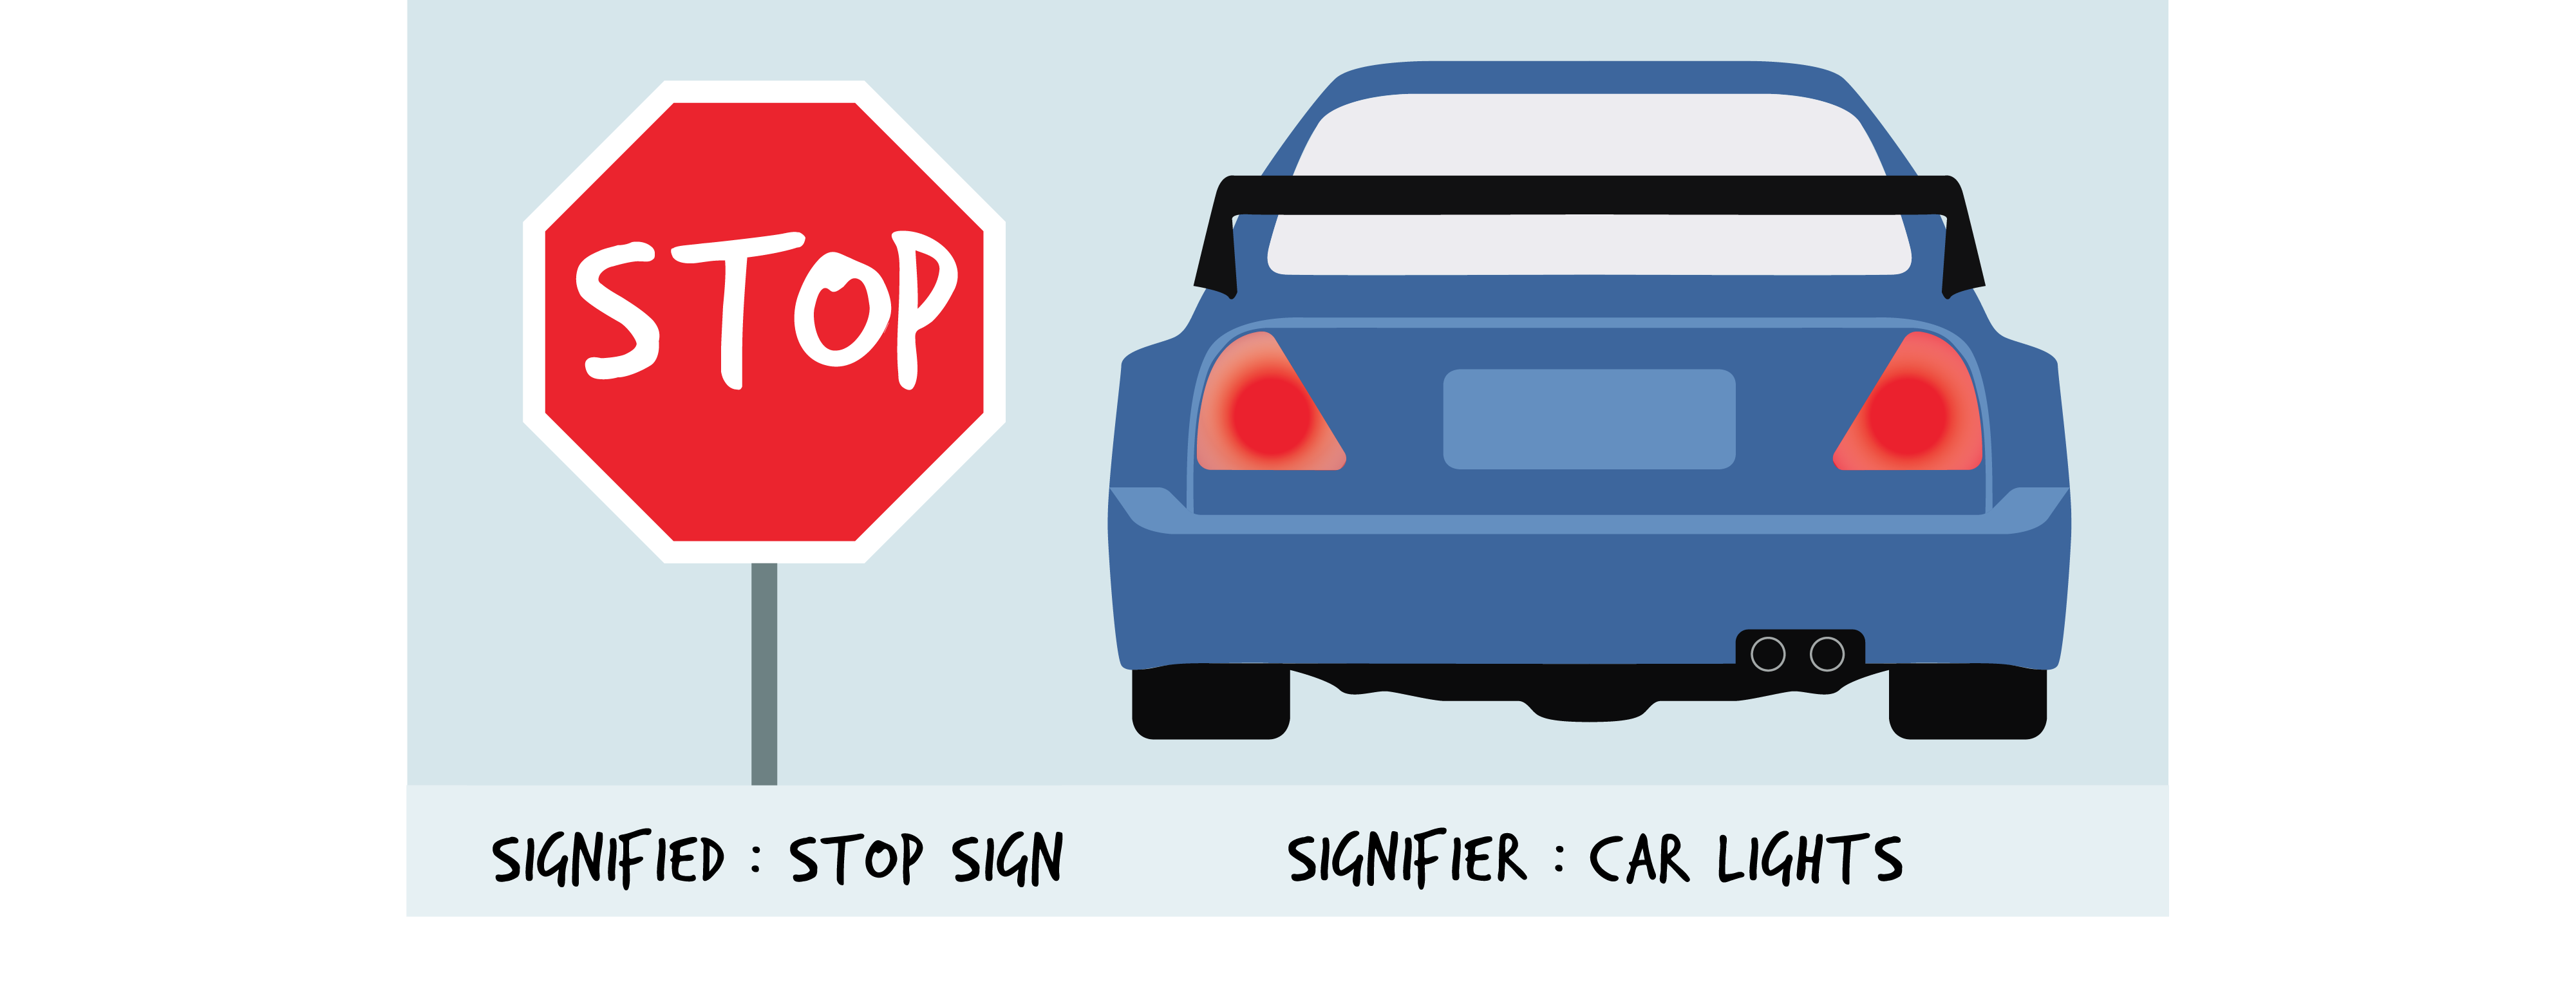 Left: a red stop sign. Text underneath reads Signified, Stop Sign. Right: a blue car with tail lights on, indicating a stop. Text underneath reads Signifier, Car lights.